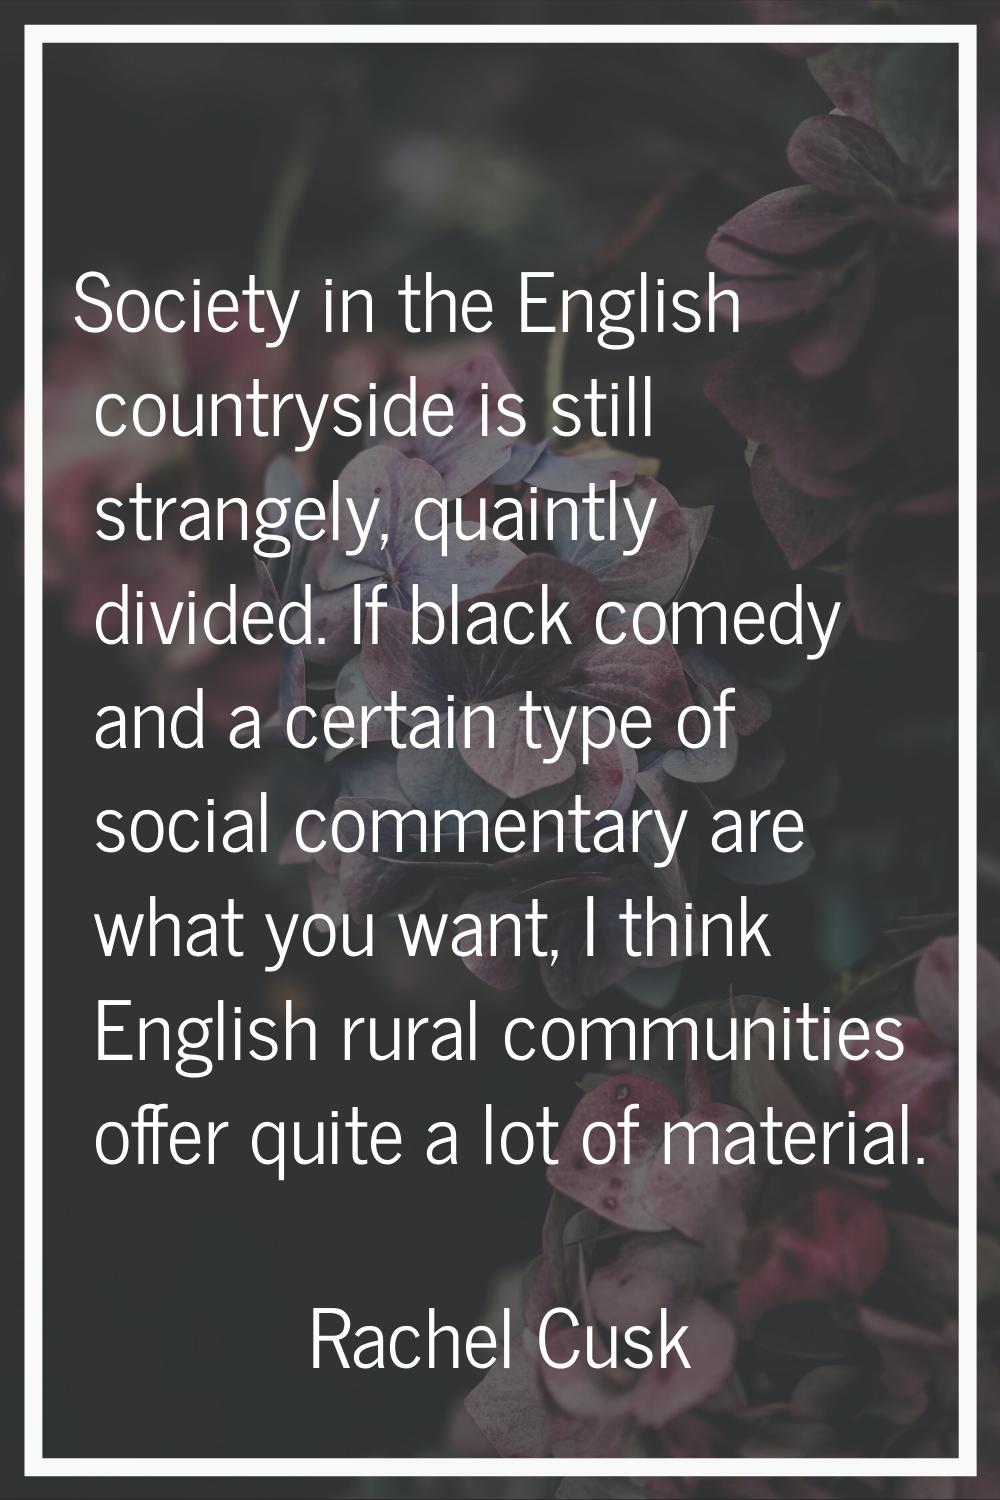 Society in the English countryside is still strangely, quaintly divided. If black comedy and a cert